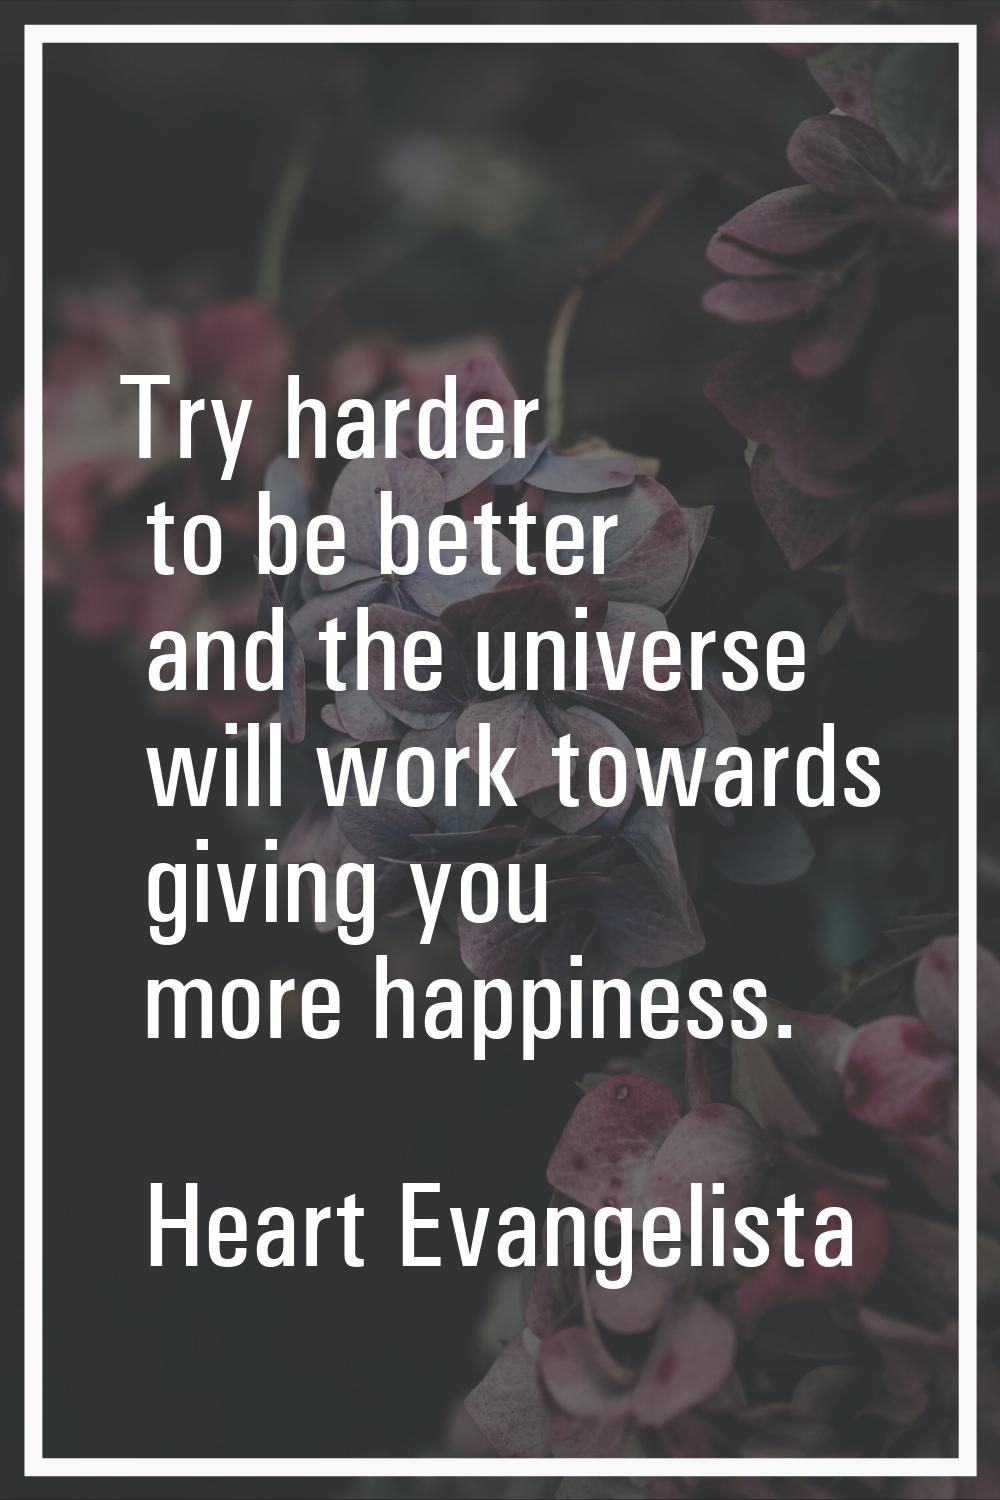 Try harder to be better and the universe will work towards giving you more happiness.